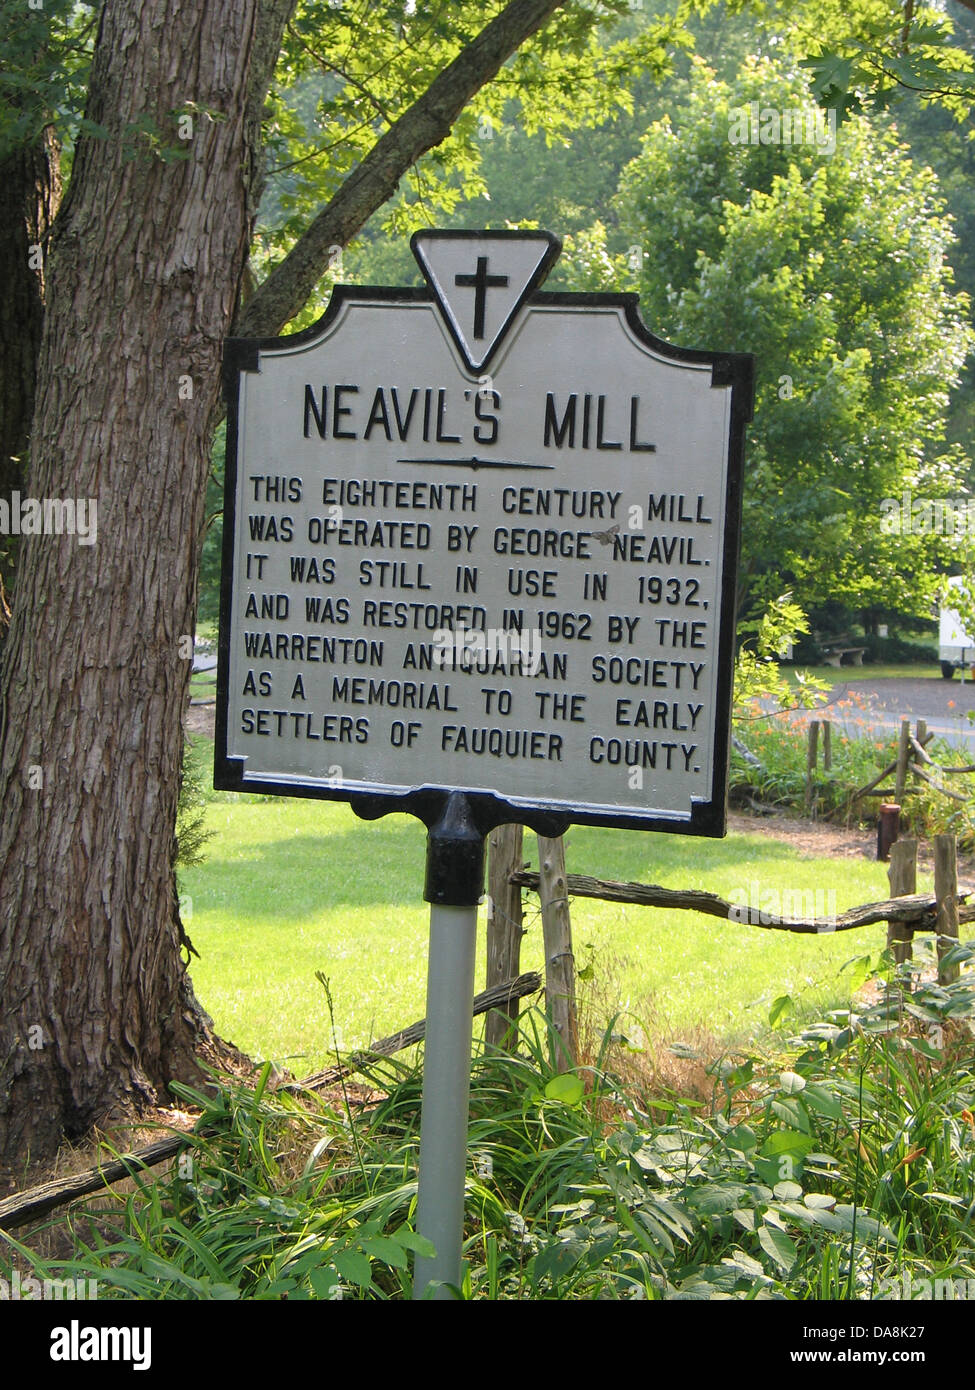 NEAVIL'S MILL This eighteenth century mill was operated by George Neavil. It was still in use in 1932, and was restored in 1962 by the Warrenton Antiquarian Society as a memorial to the early settlers of Fauquier County. Stock Photo